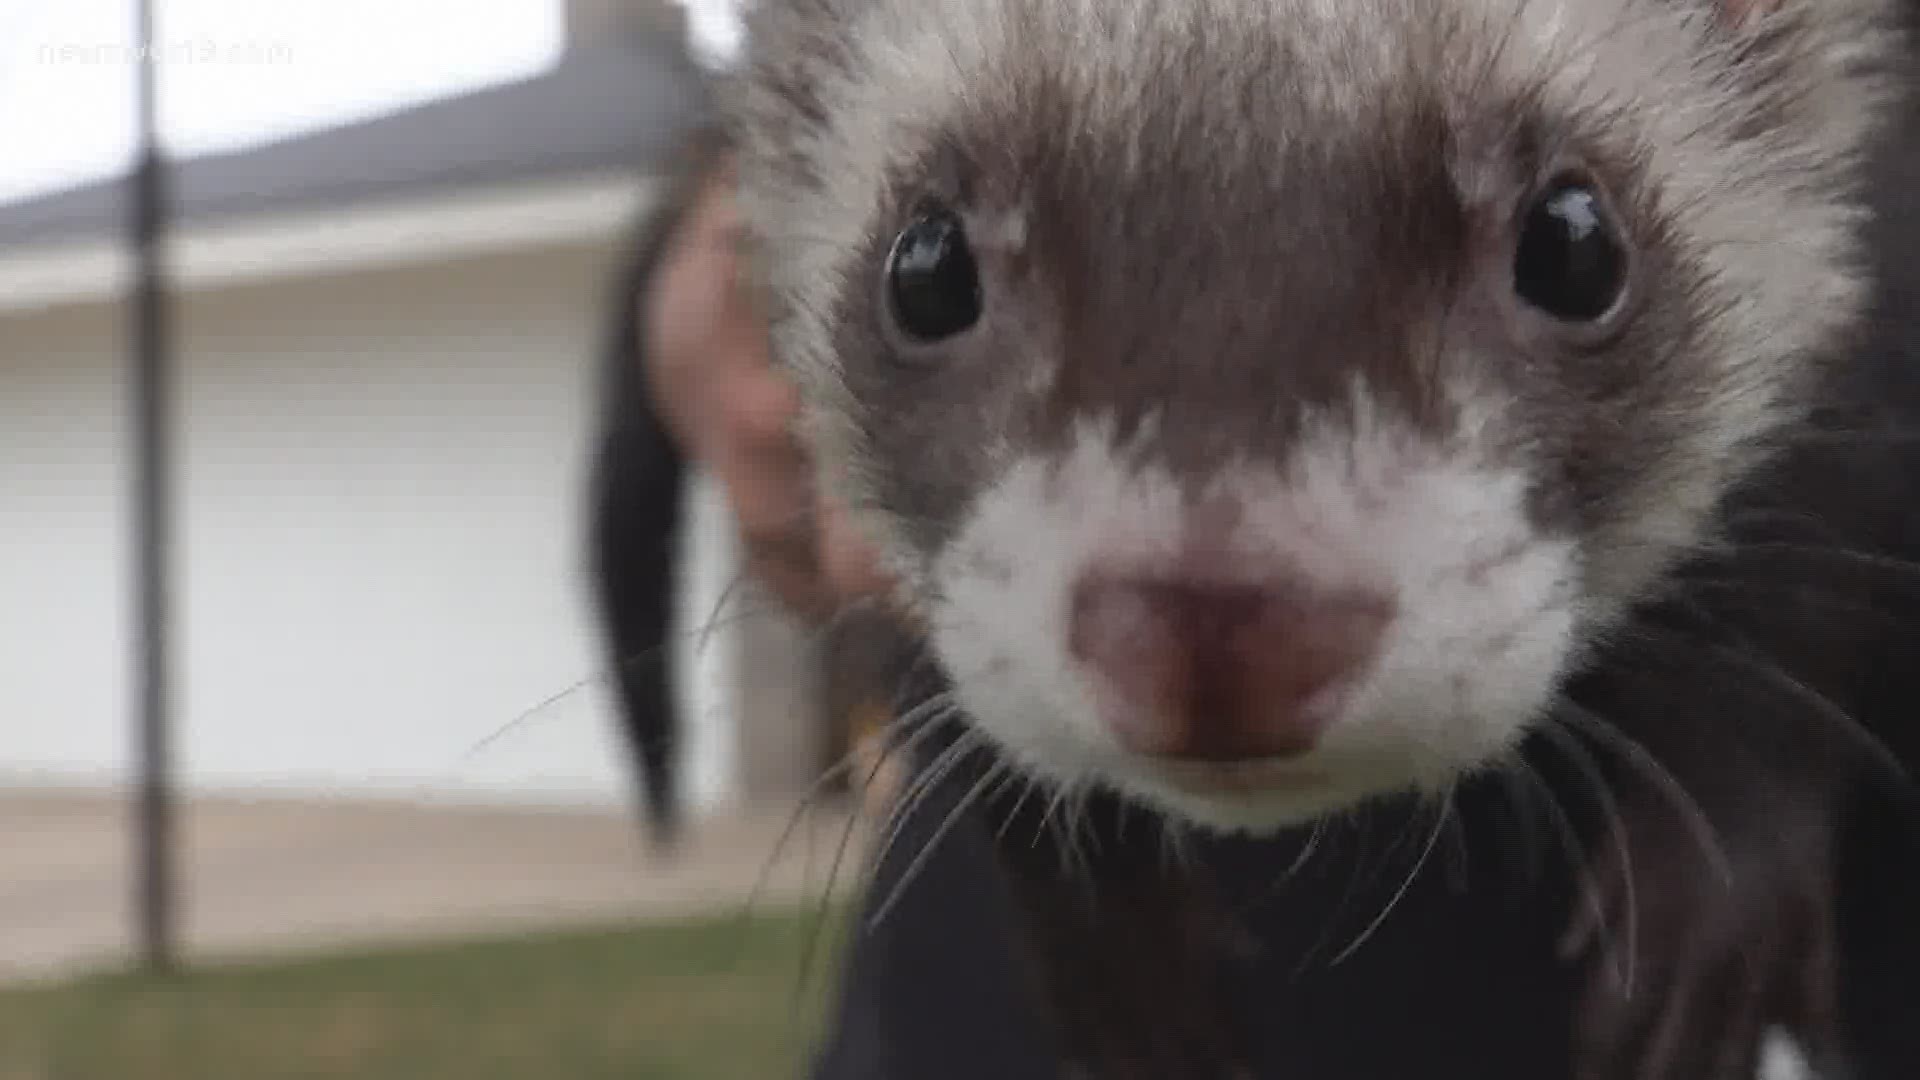 Turns out, lost ferrets are a common problem in the Basin. But this story has a happy ending.